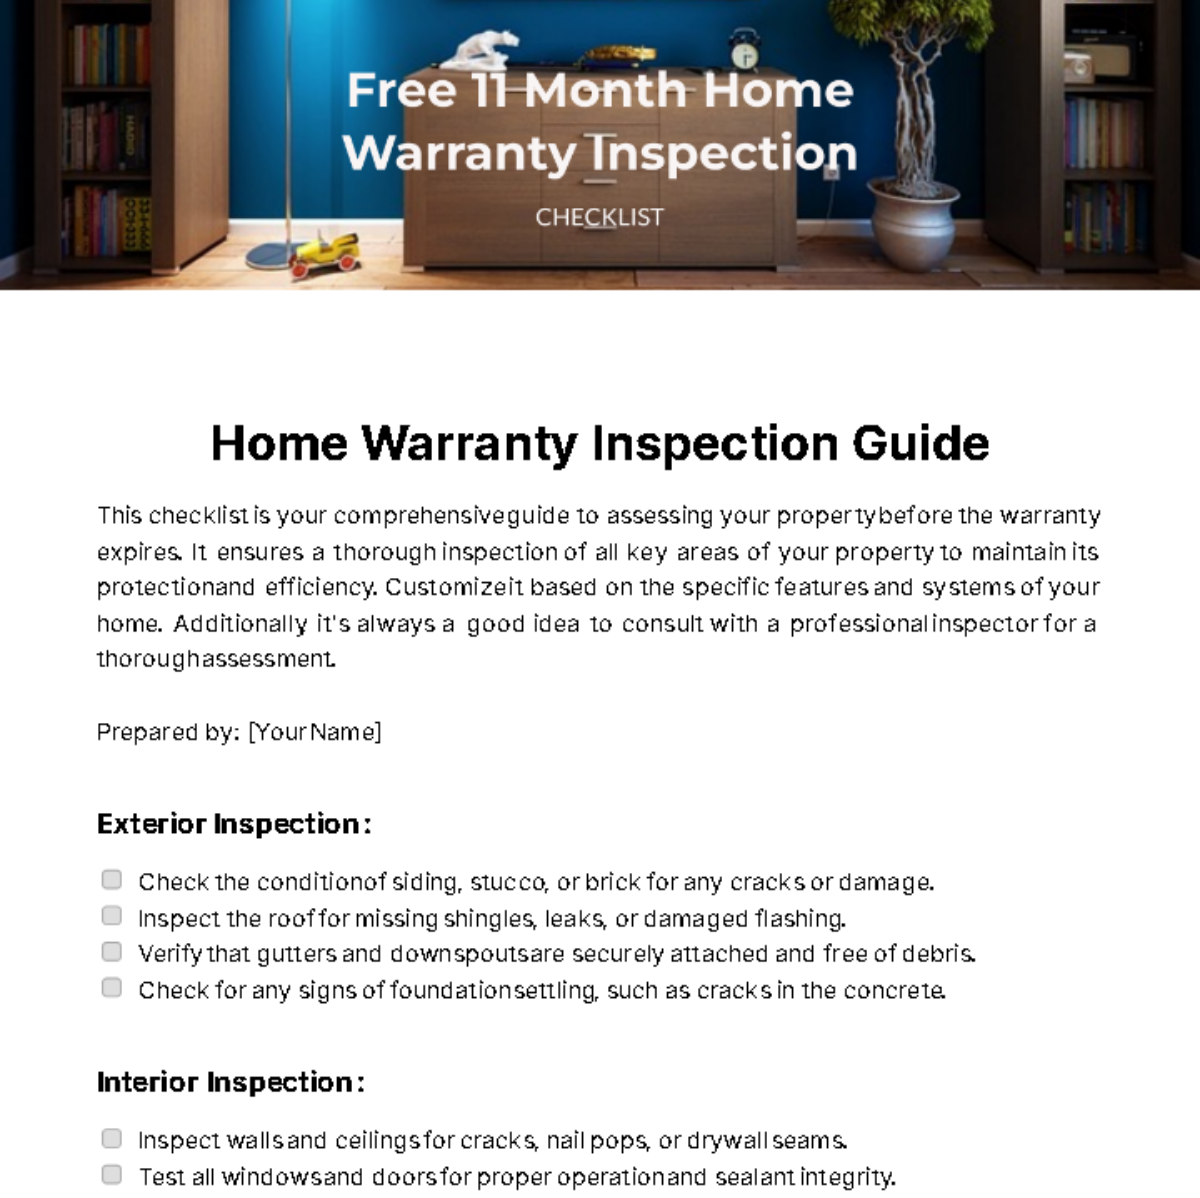 11 Month Home Warranty Inspection Checklist Template